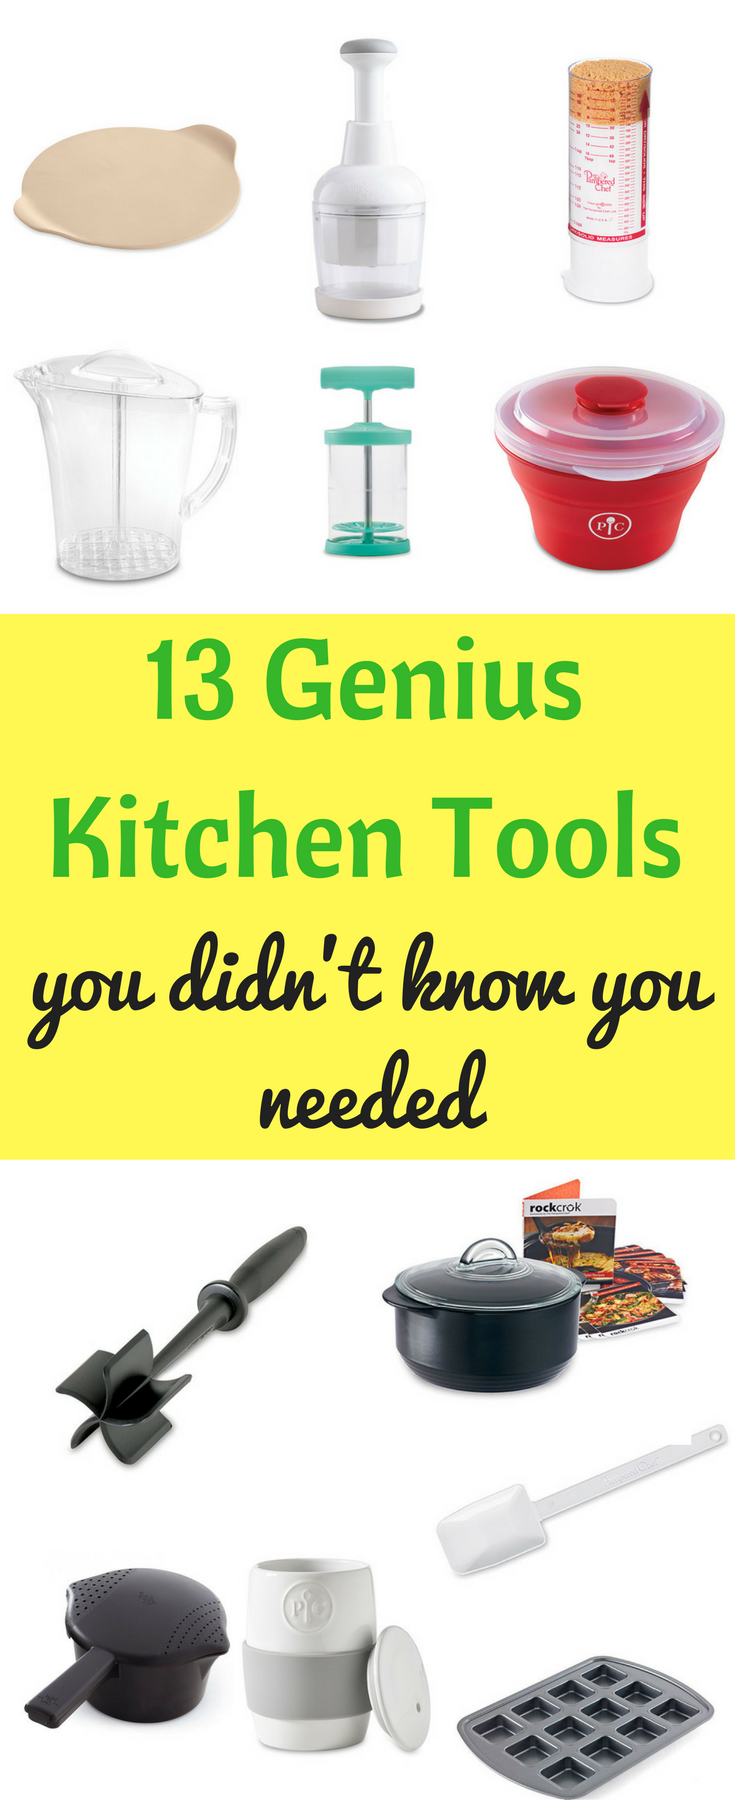 Tools Every Kitchen Needs - Pampered Chef Blog